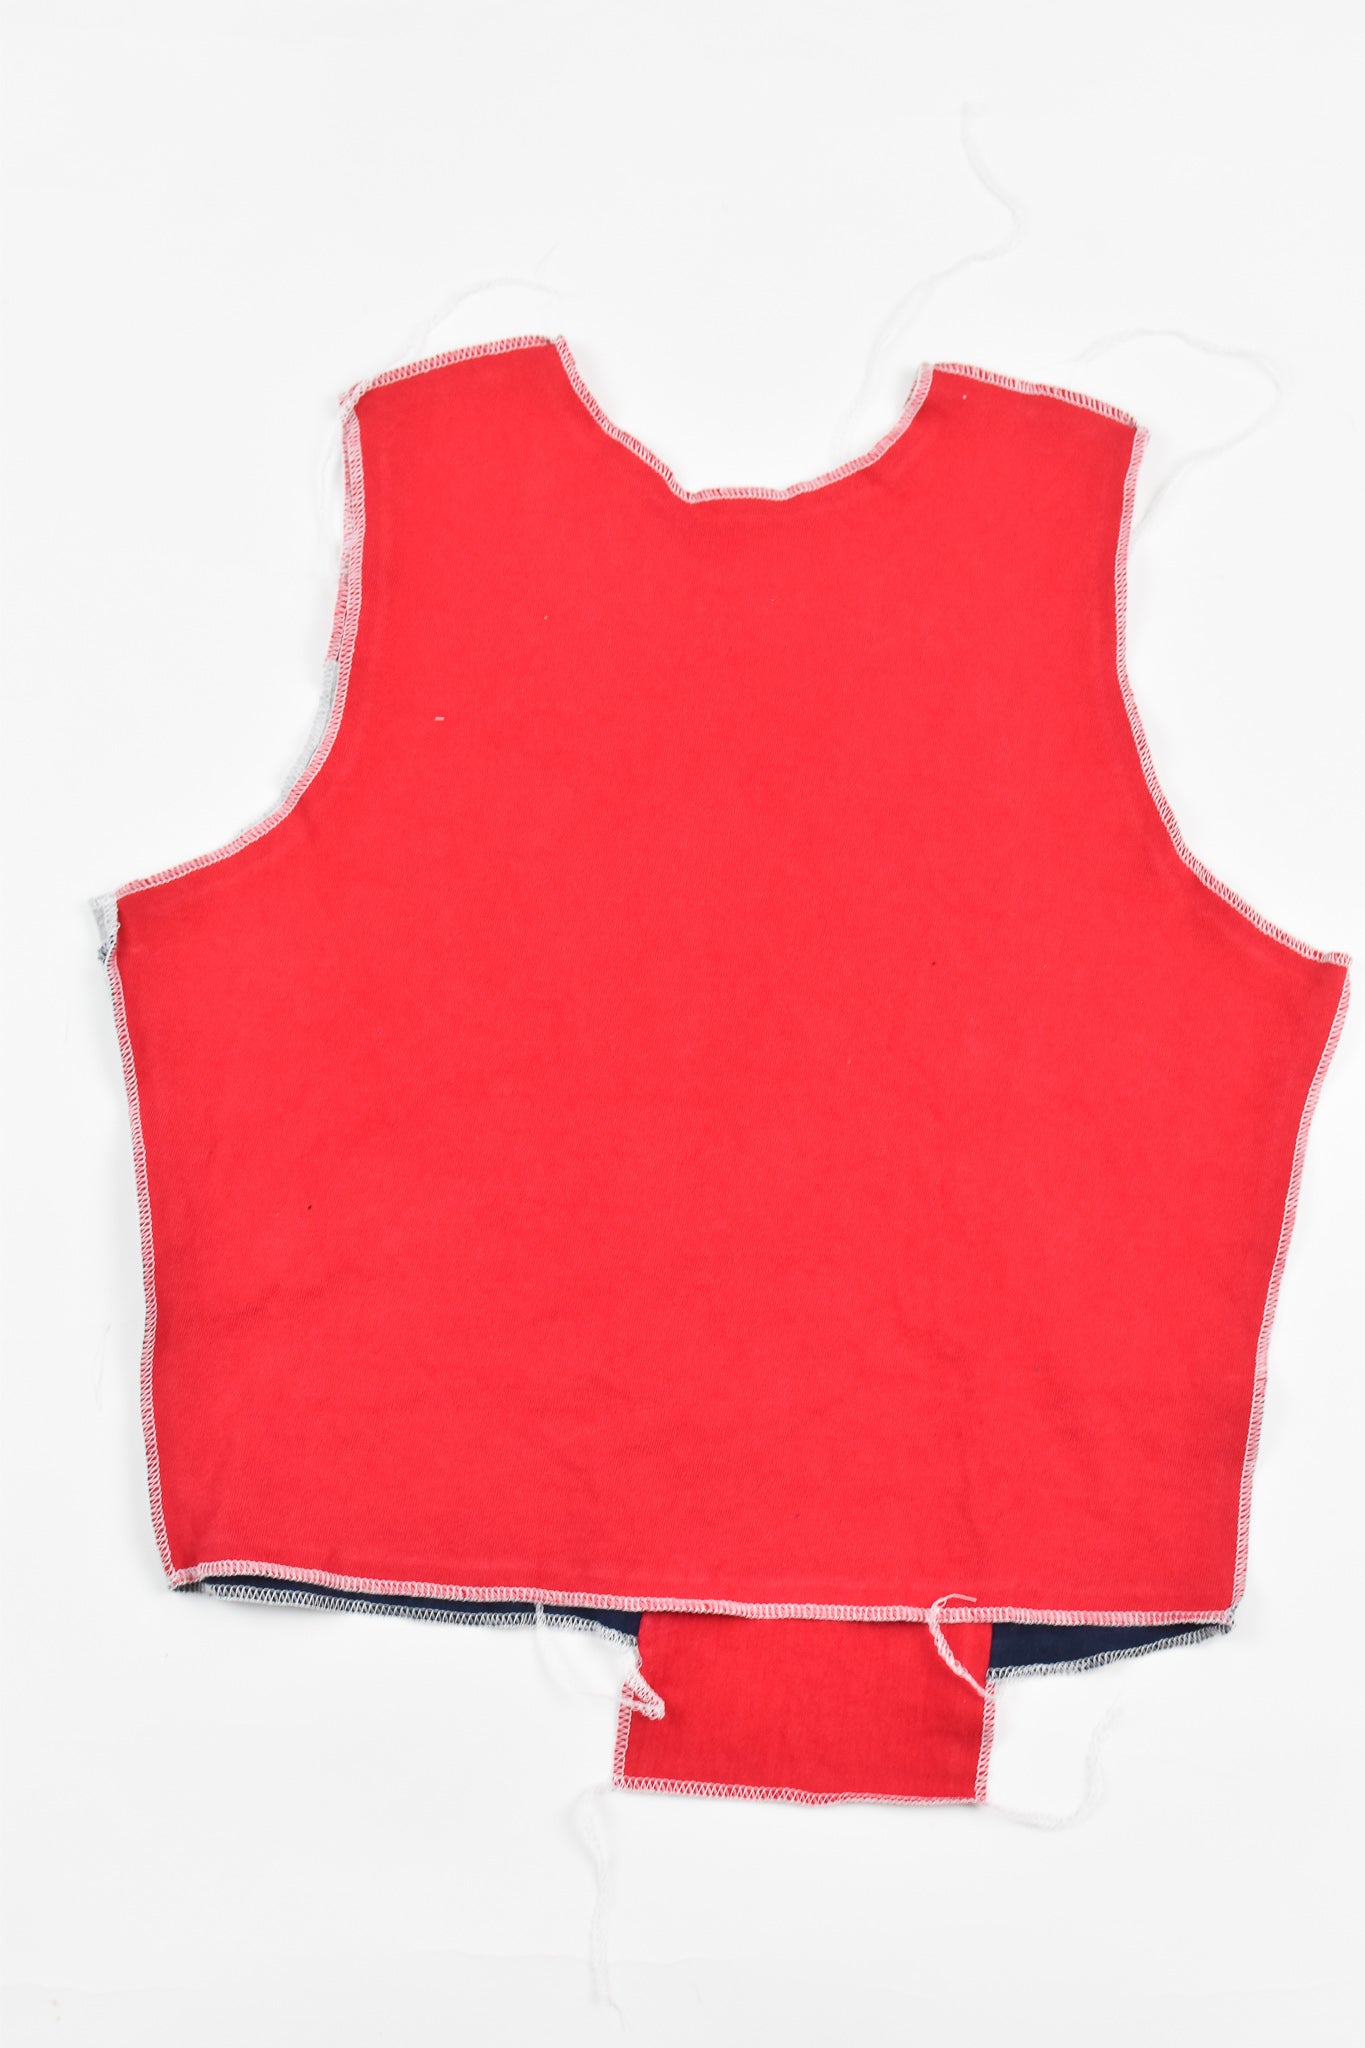 Upcycled Gonzaga Scrappy Tank Top